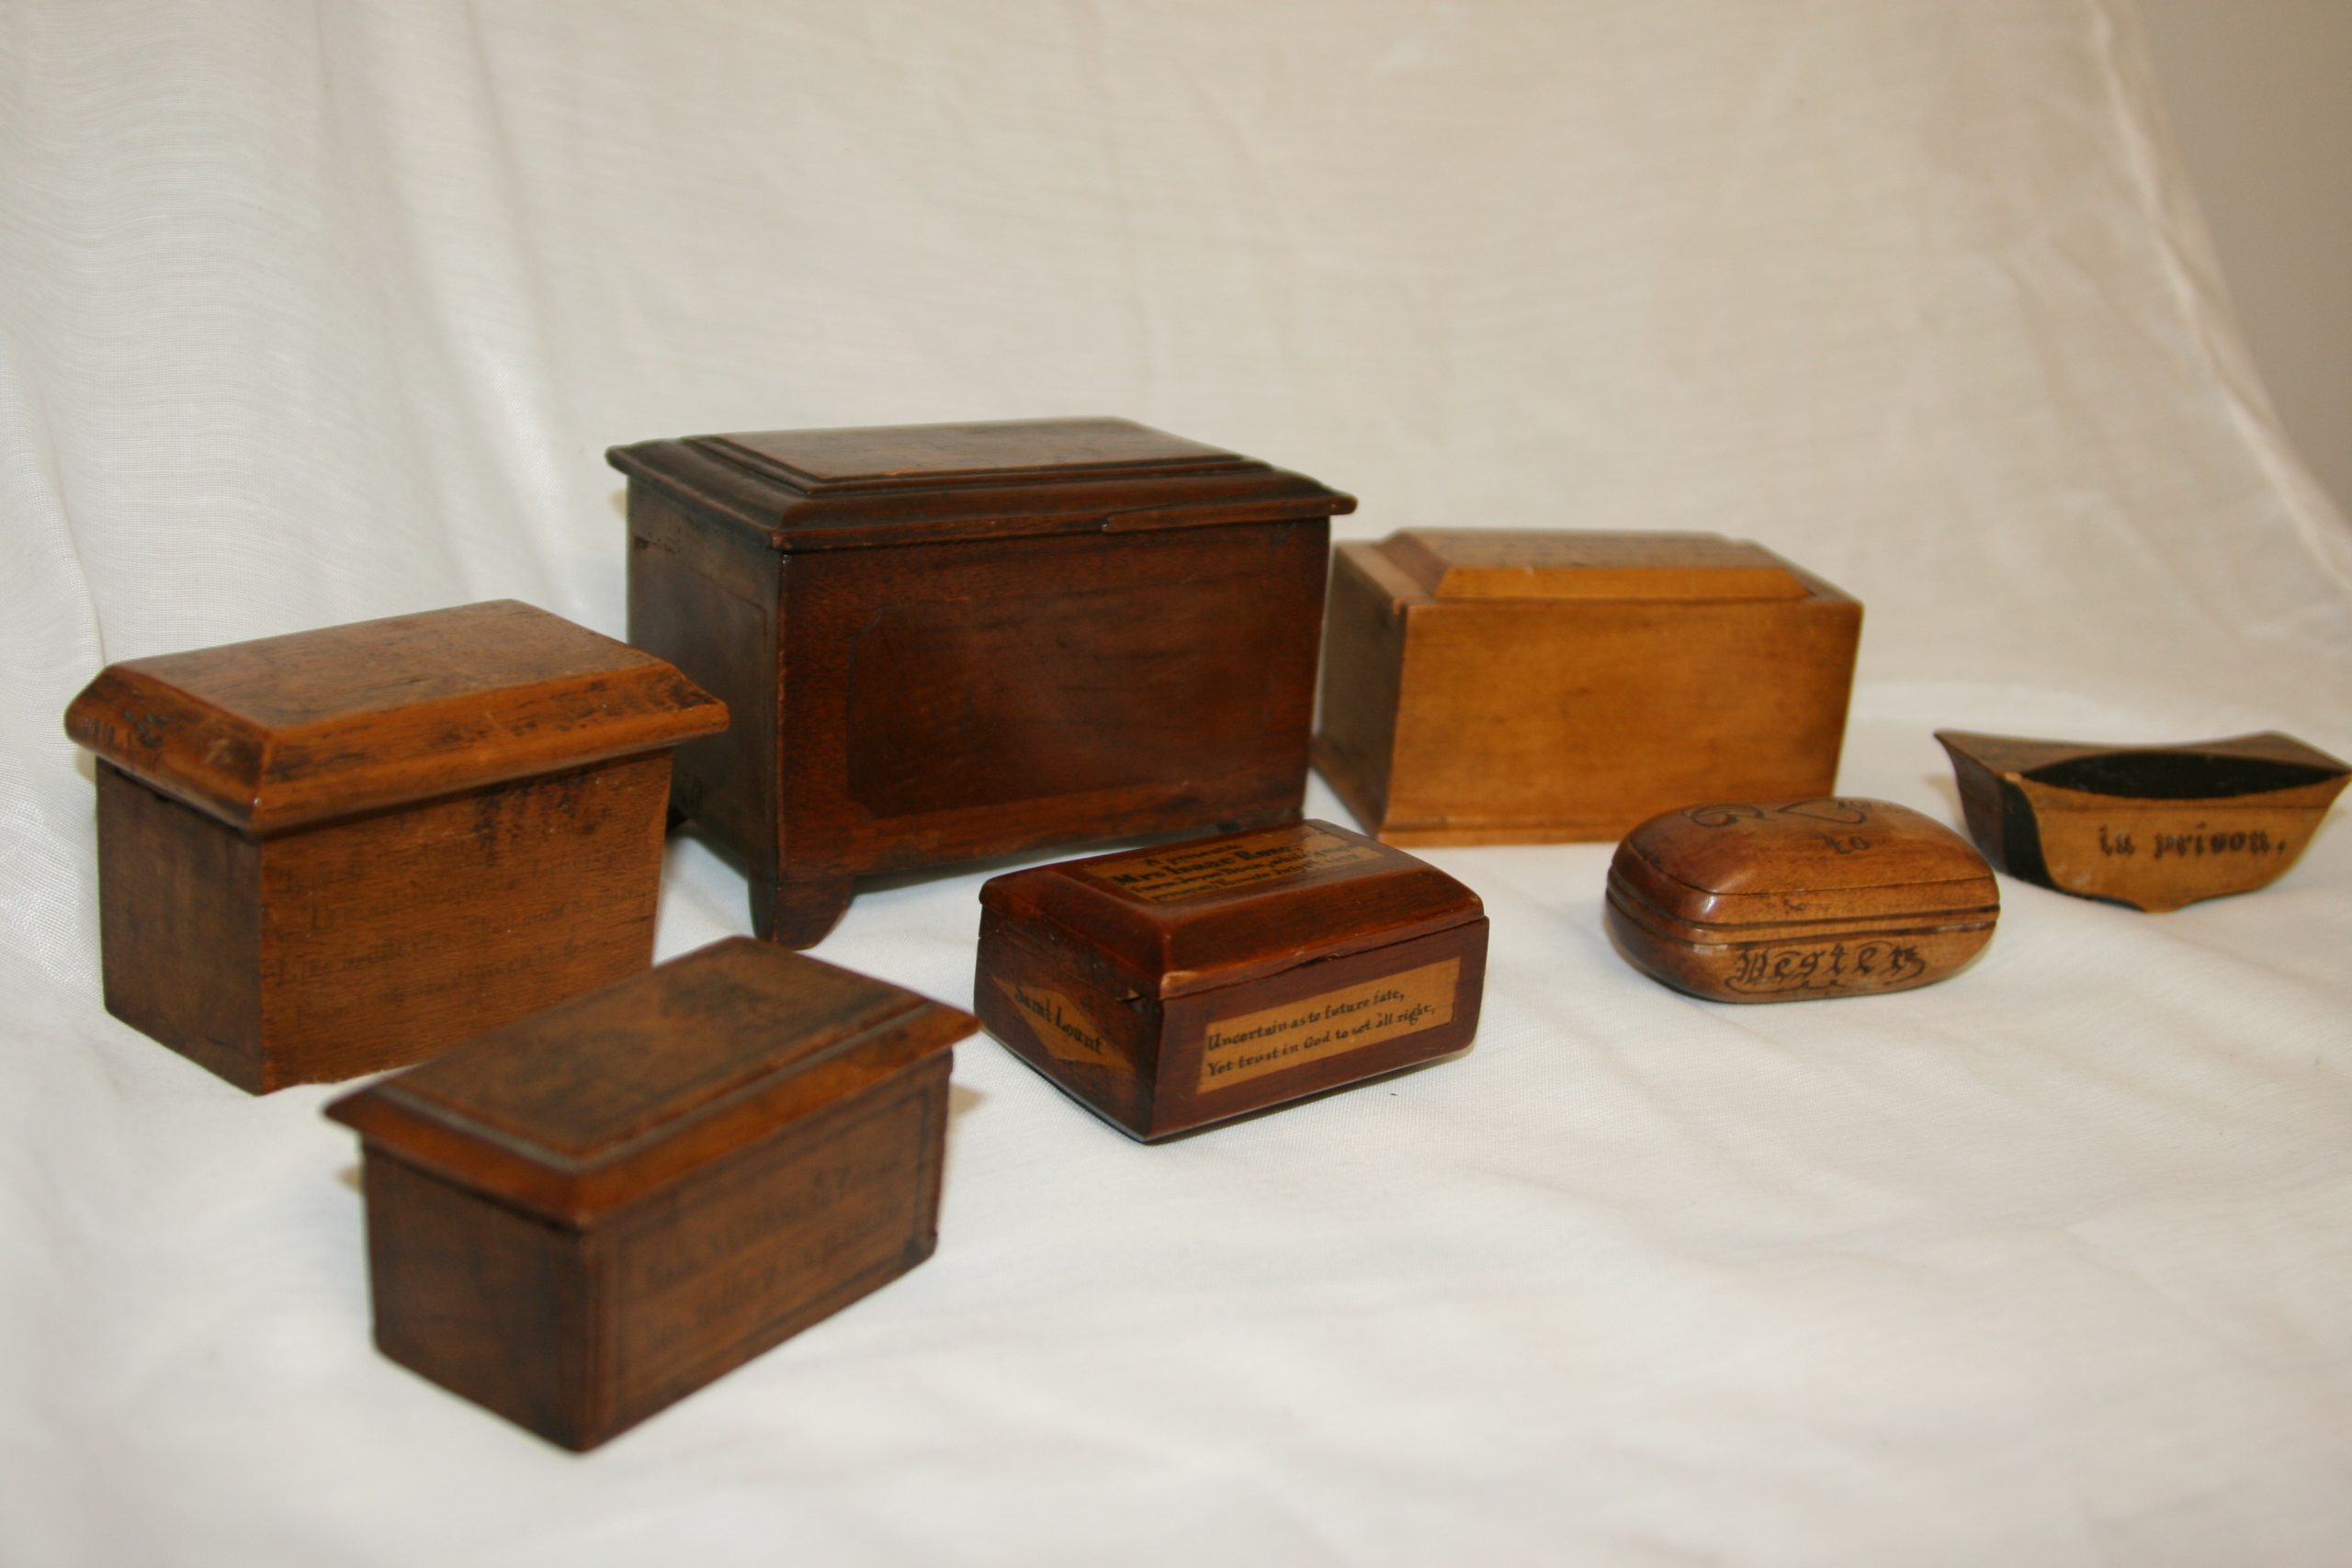 The seven rebellion boxes made by imprisoned rebels that are in the Sharon Temple's collection.